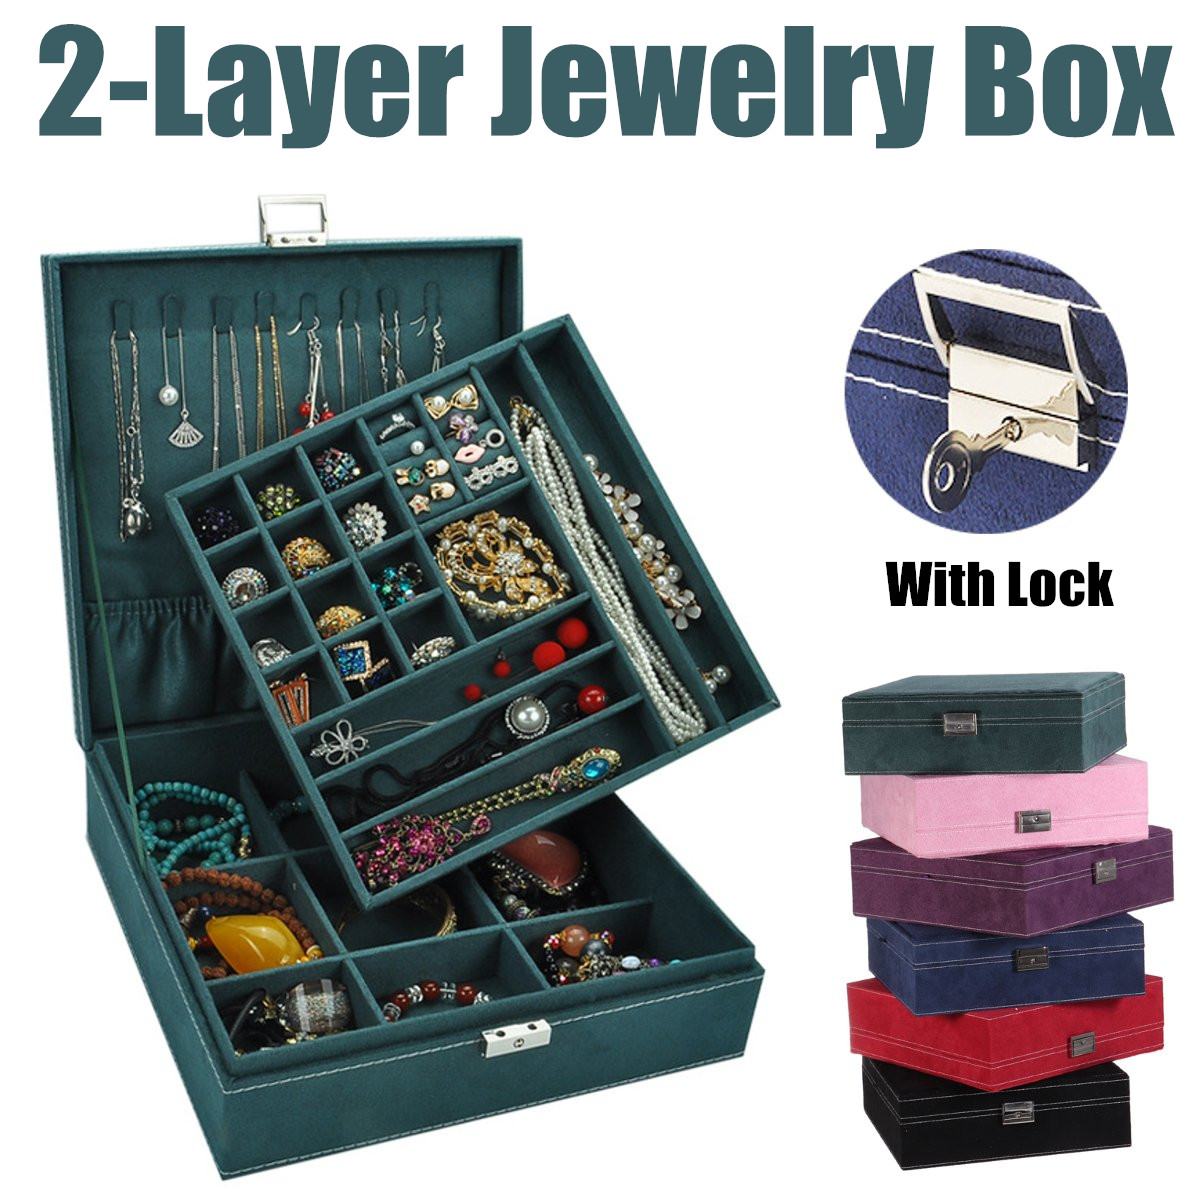 Multi-function-Vintage-Jewelry-Box-Organizers-Two-layer-Lockable-Jewelry-Display-Storage-Case-1855370-3